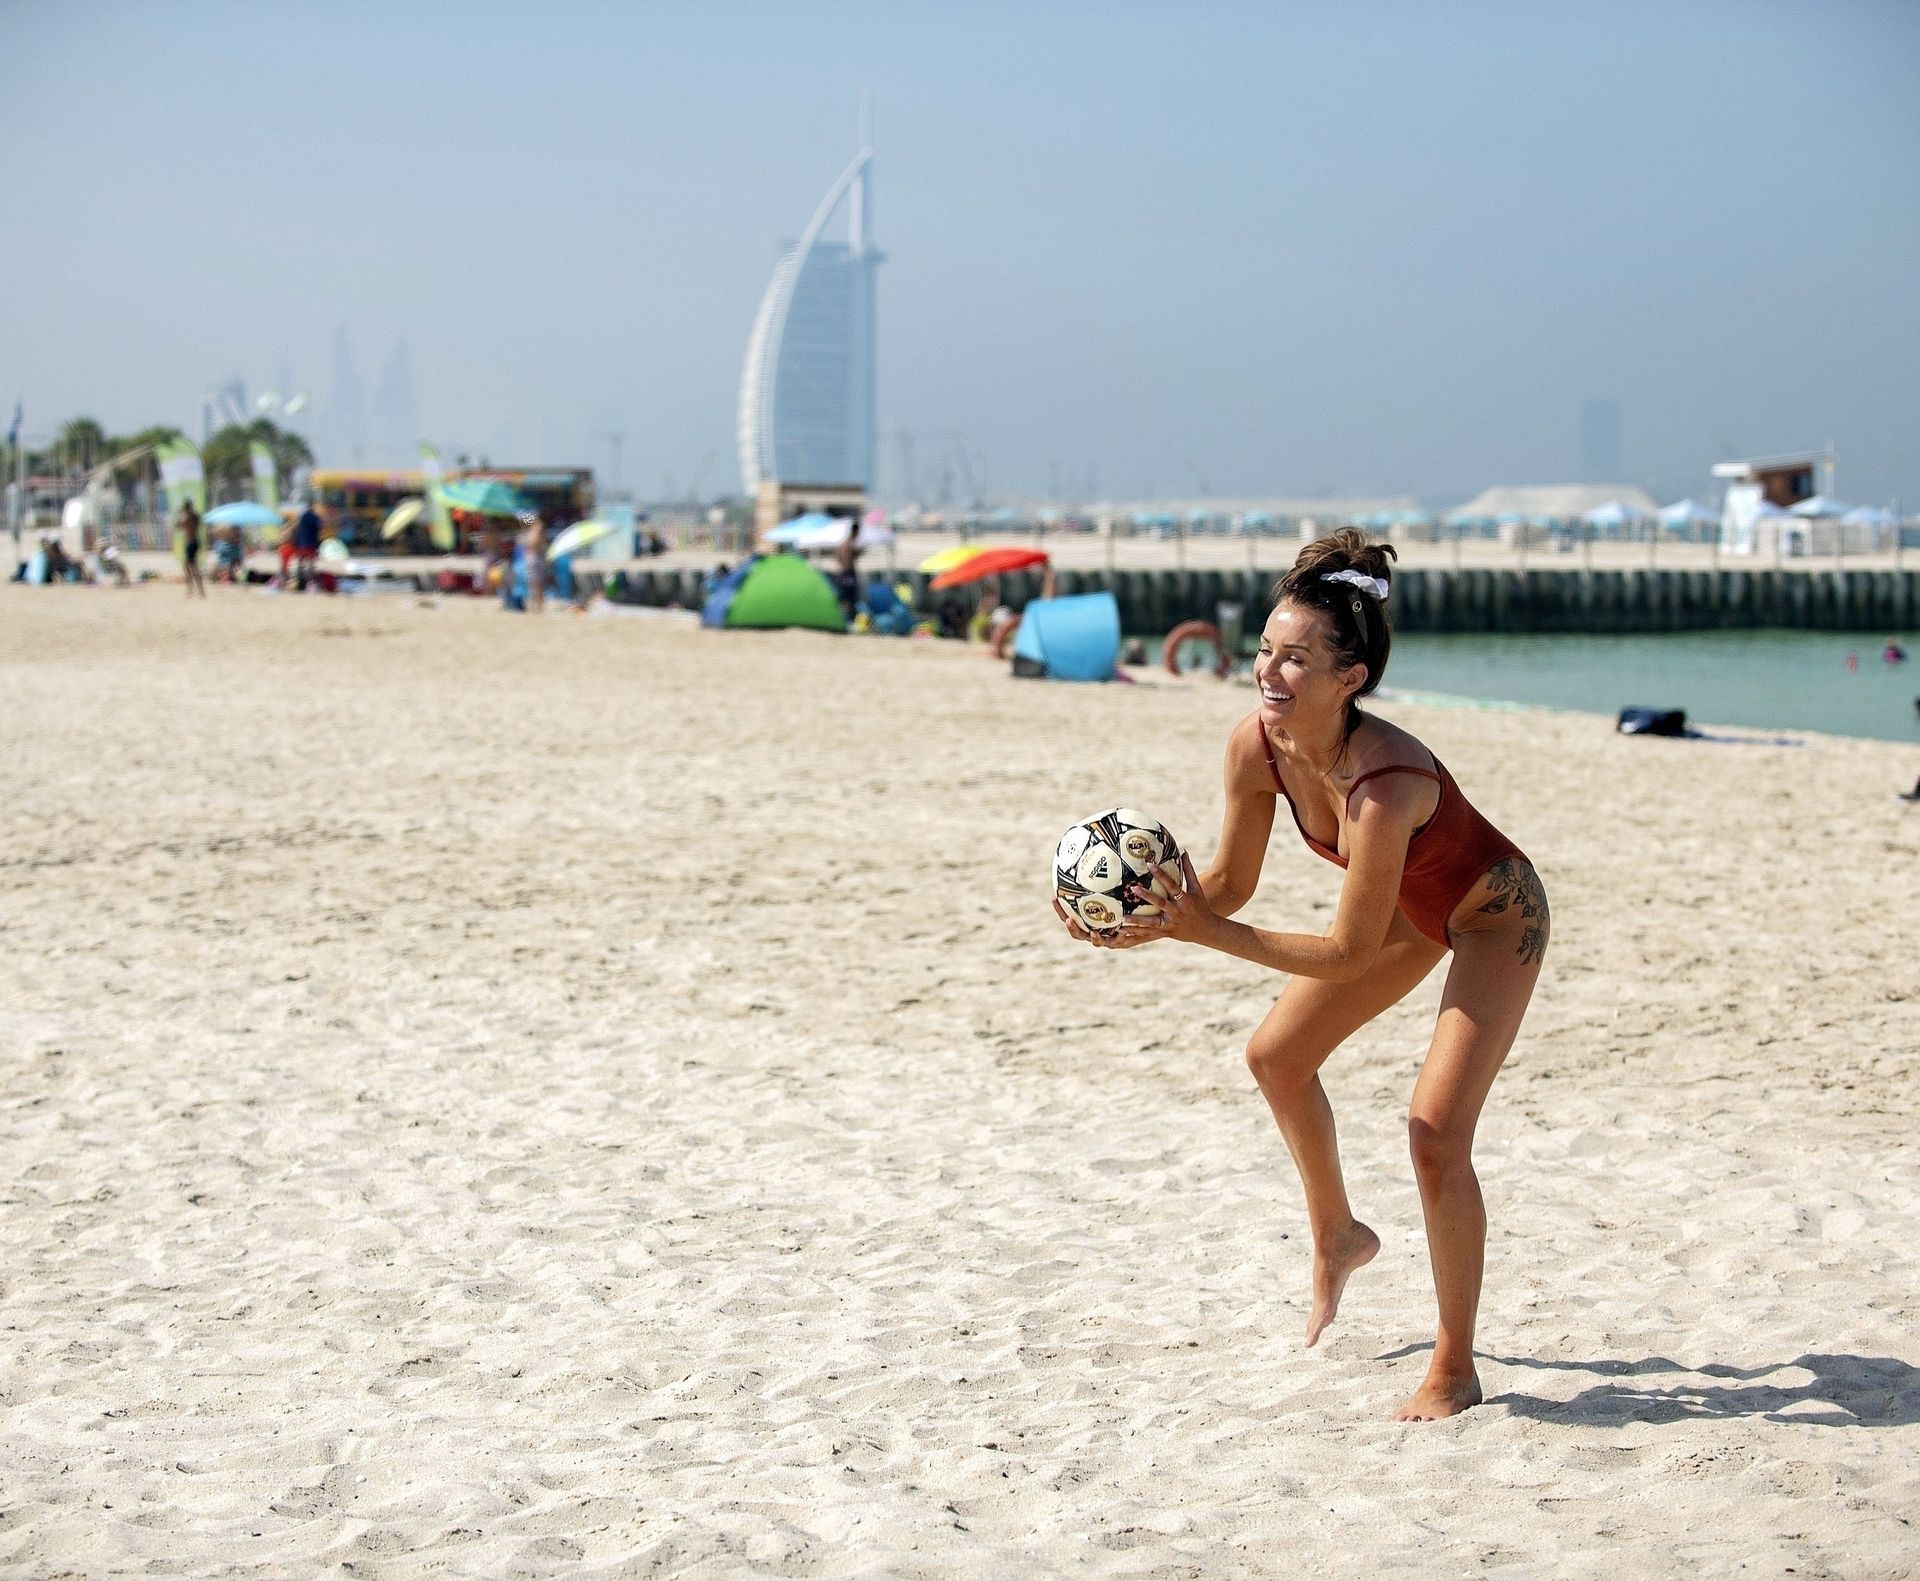 Laura Anderson Shows Off Her Ball Skills on the Beach in Dubai (14 Photos)